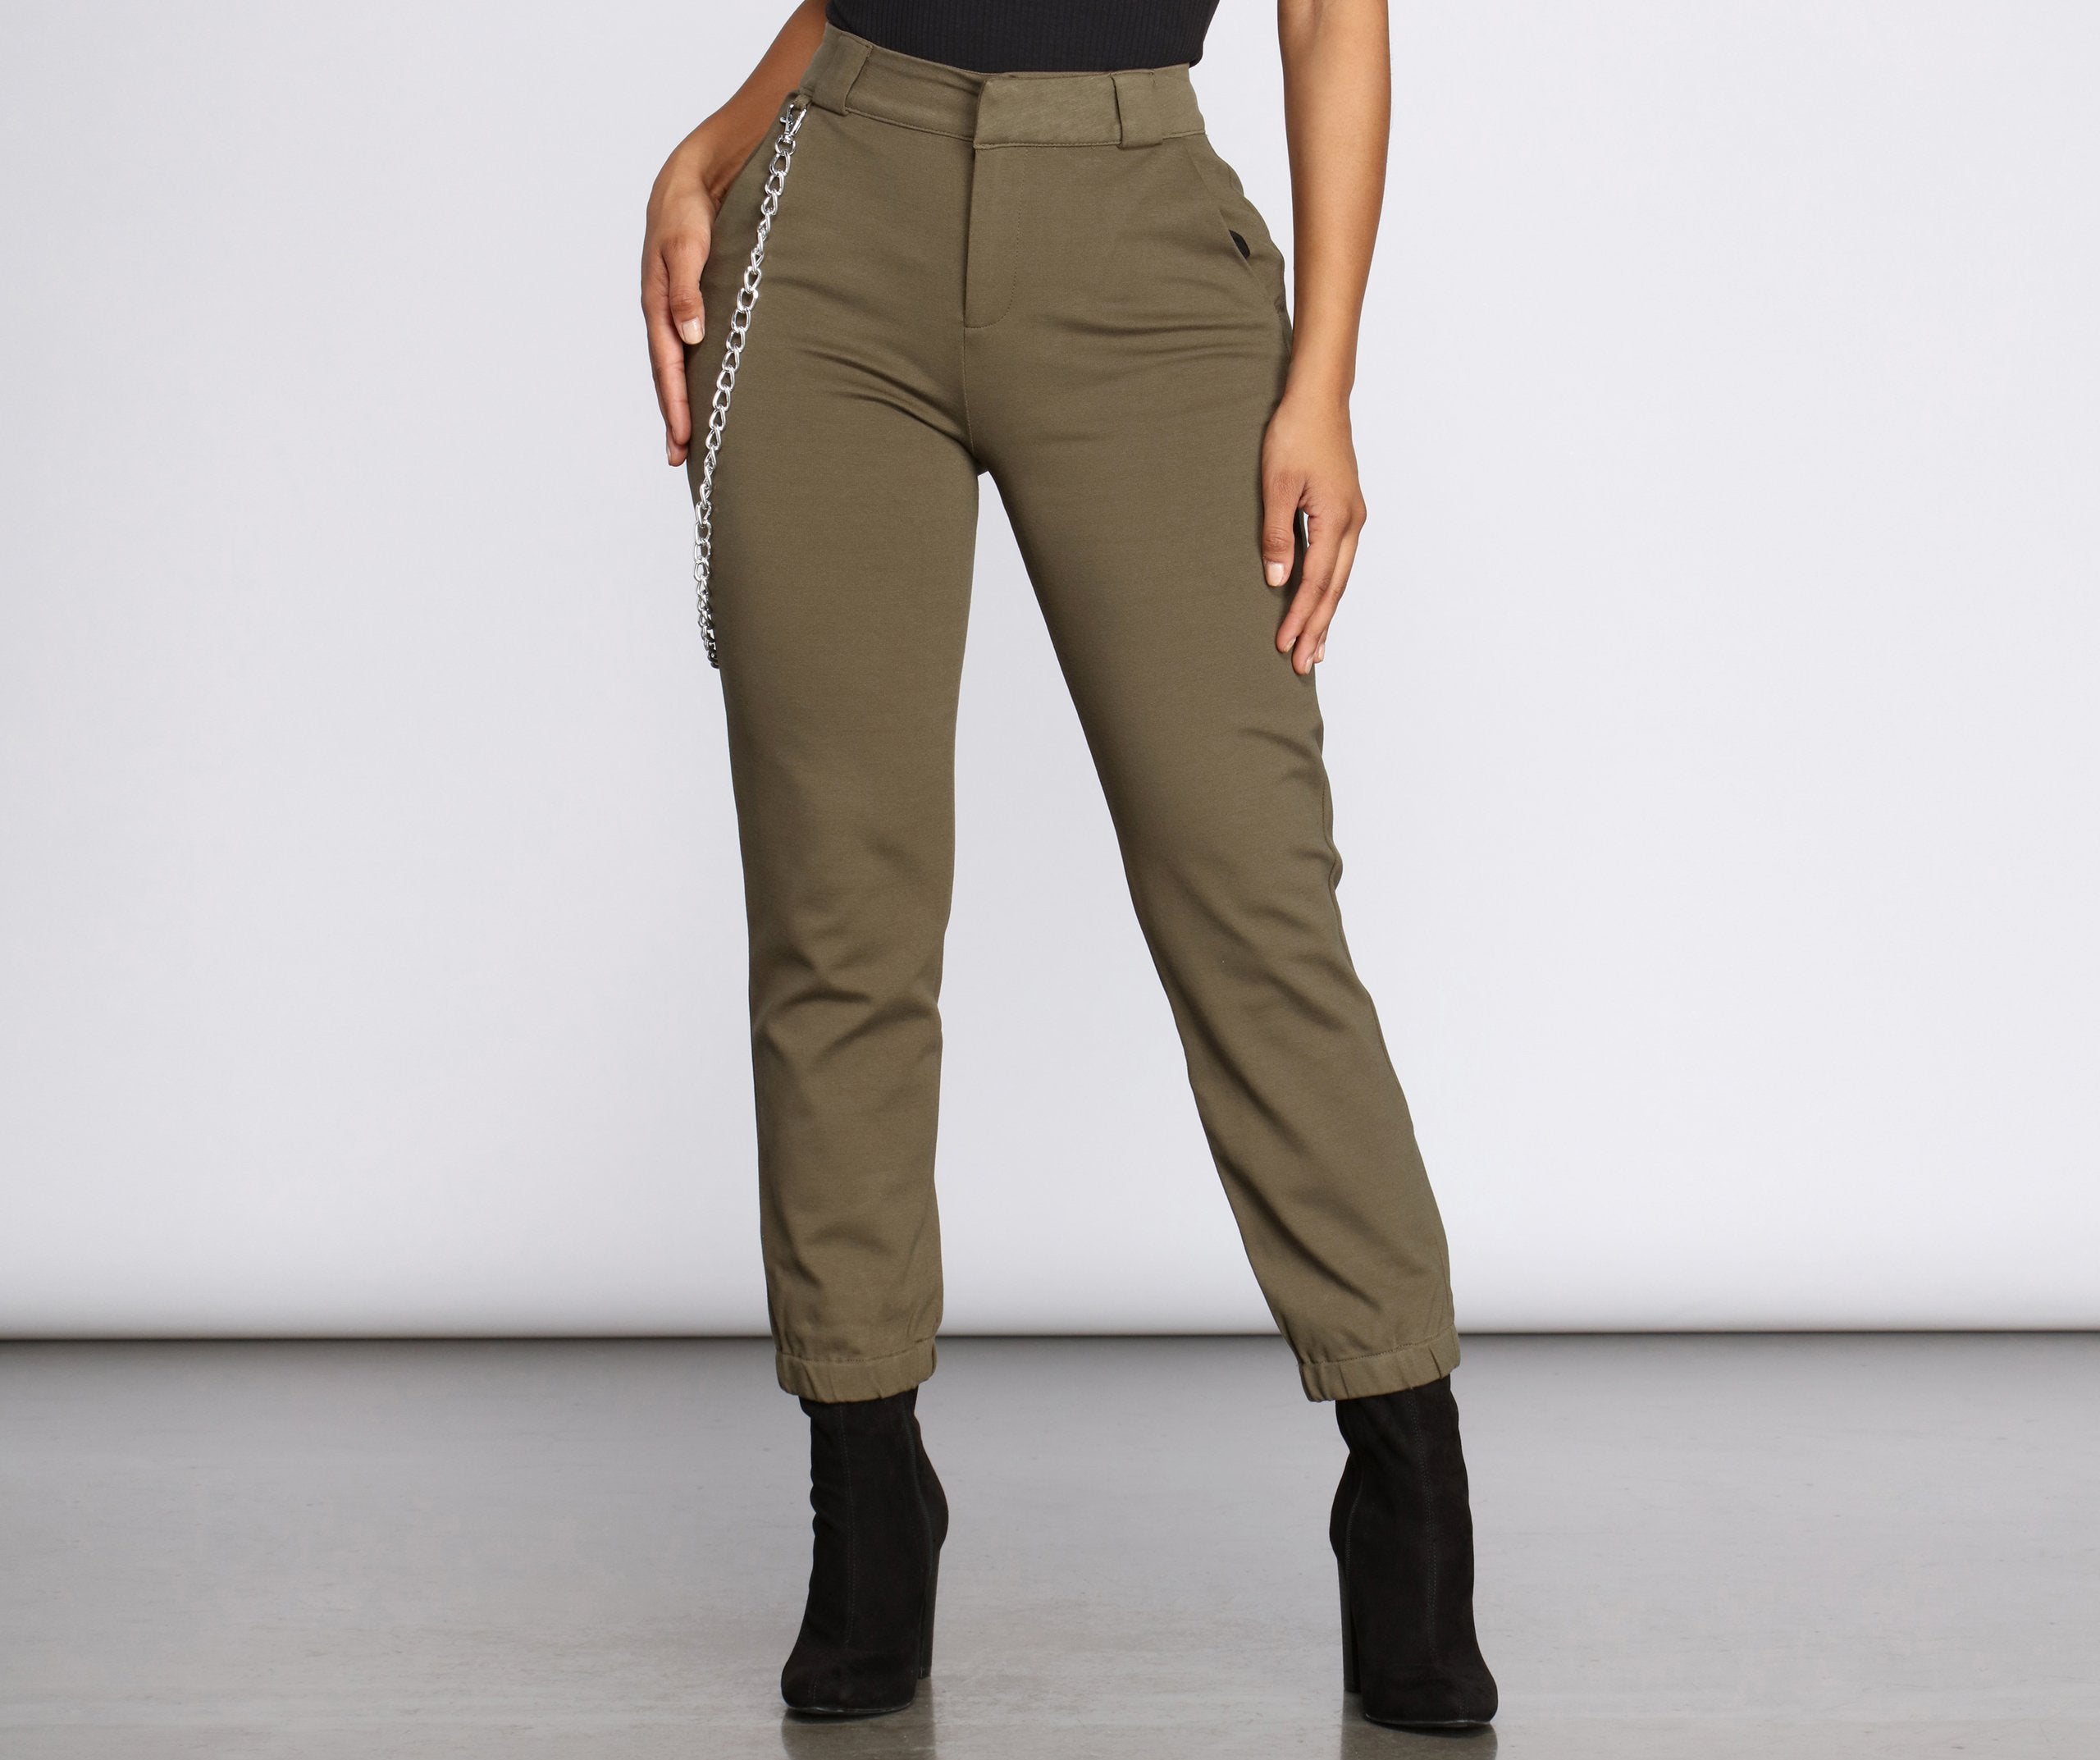 Edgy Chic Ponte Knit Joggers - Lady Occasions